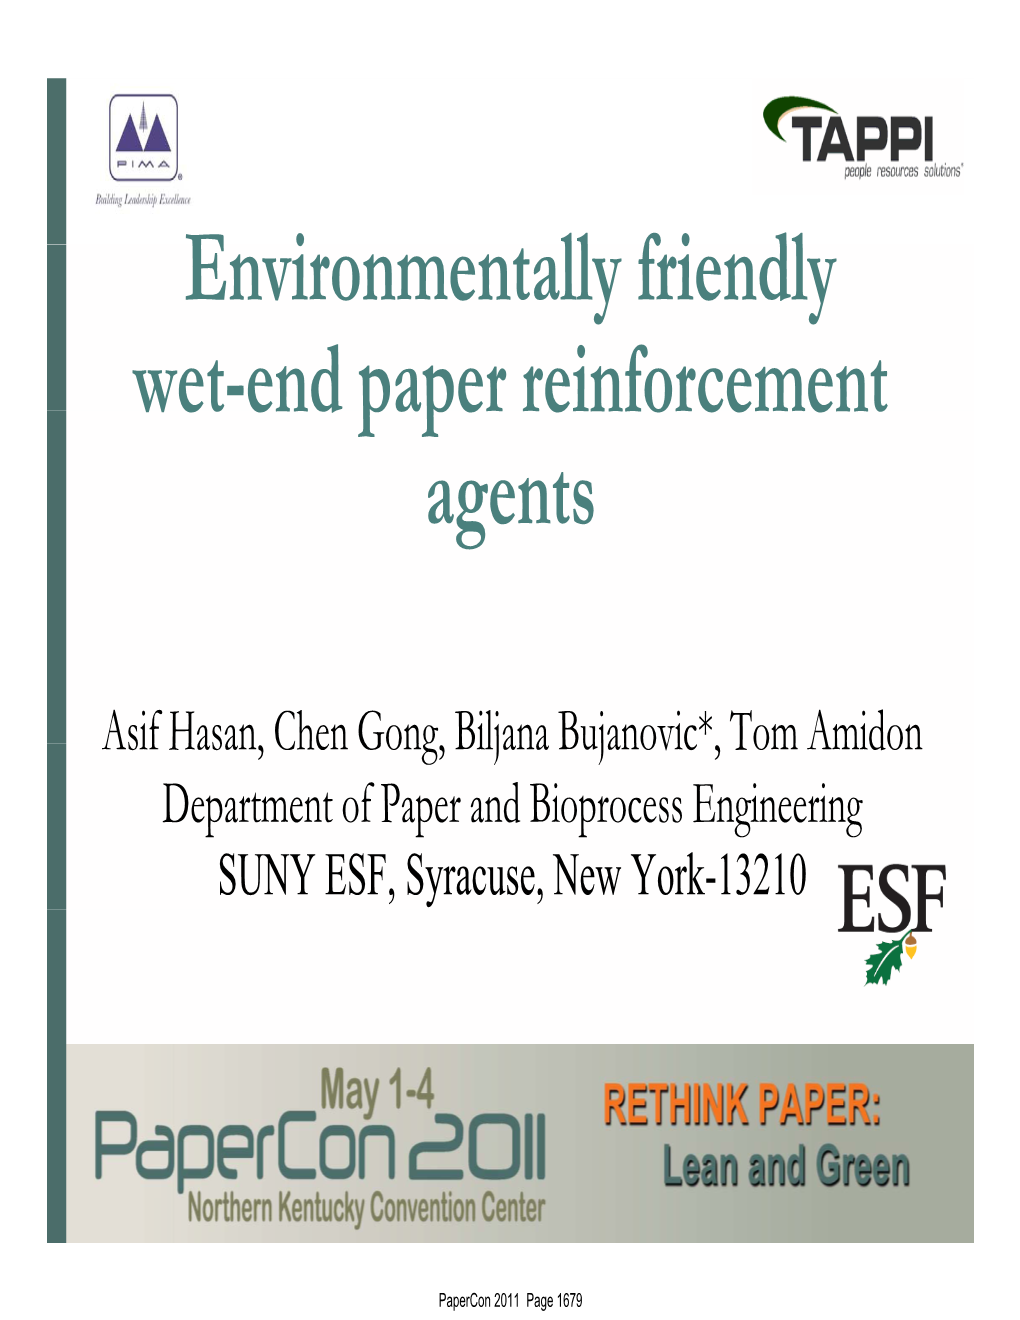 Environmentally Friendly Wet-End Paper Reinforcement Agents